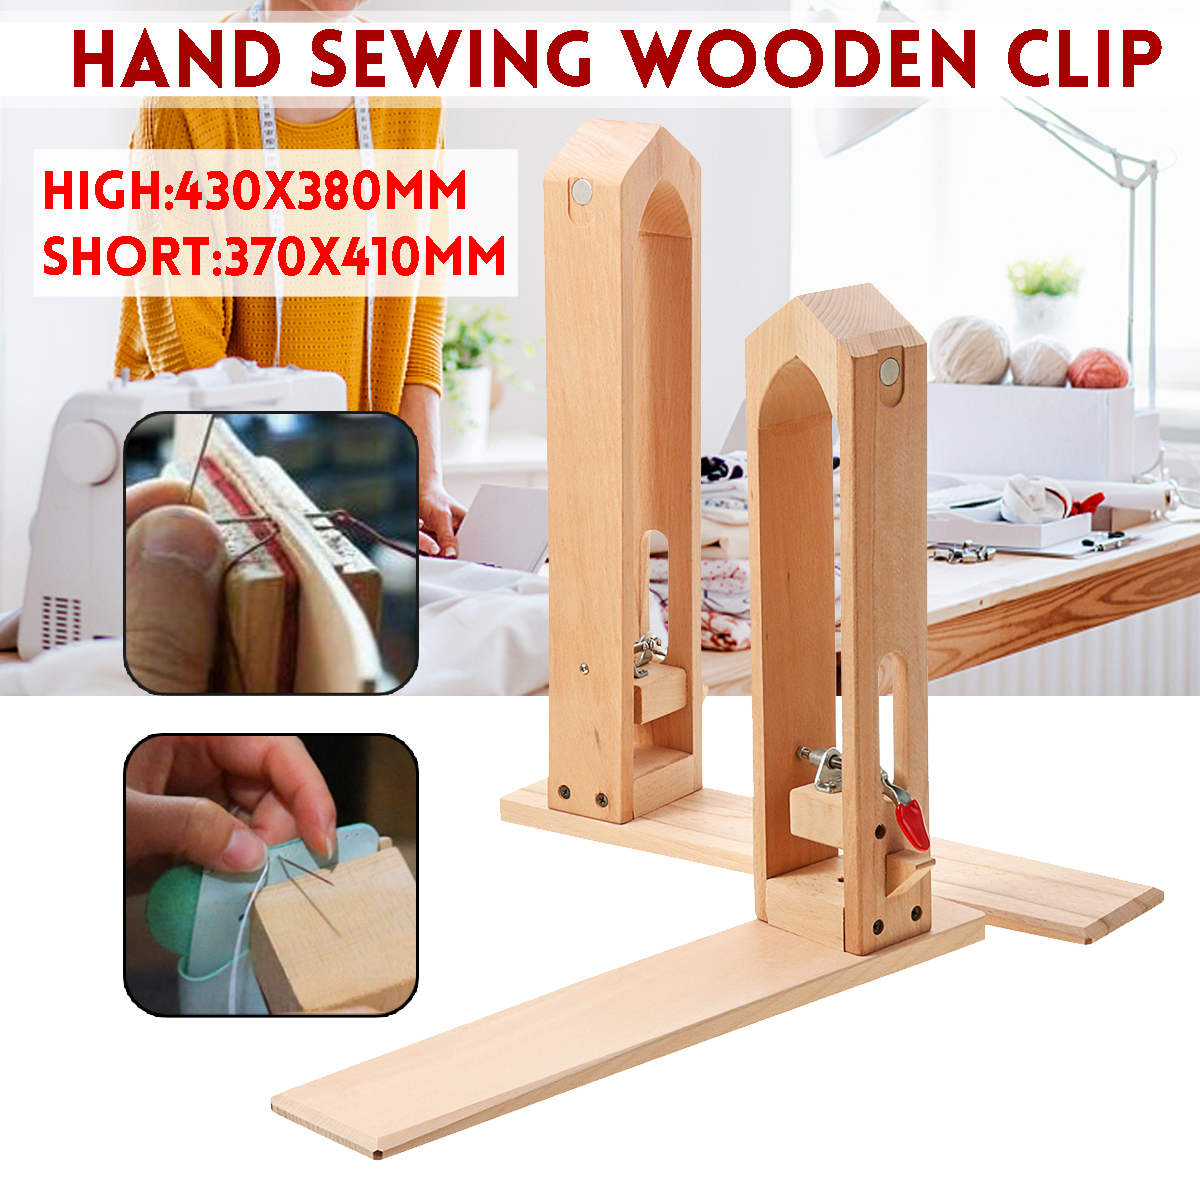 Leather-Craft-Sew-Wooden-Clip-Stitching-Hand-Adjustable-Clamp-DIY-Essential-Tool-1715170-1